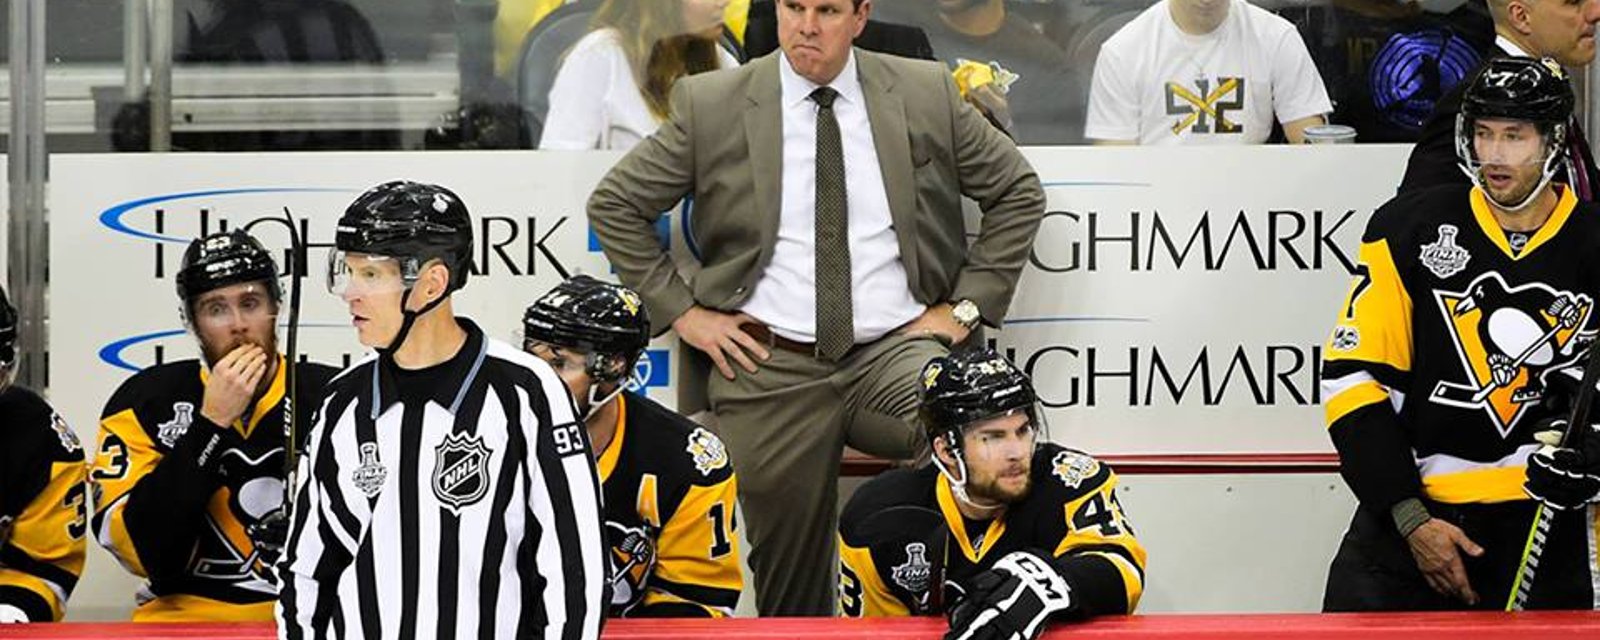 Report: Sullivan shares stance on controversial injury secrecy 